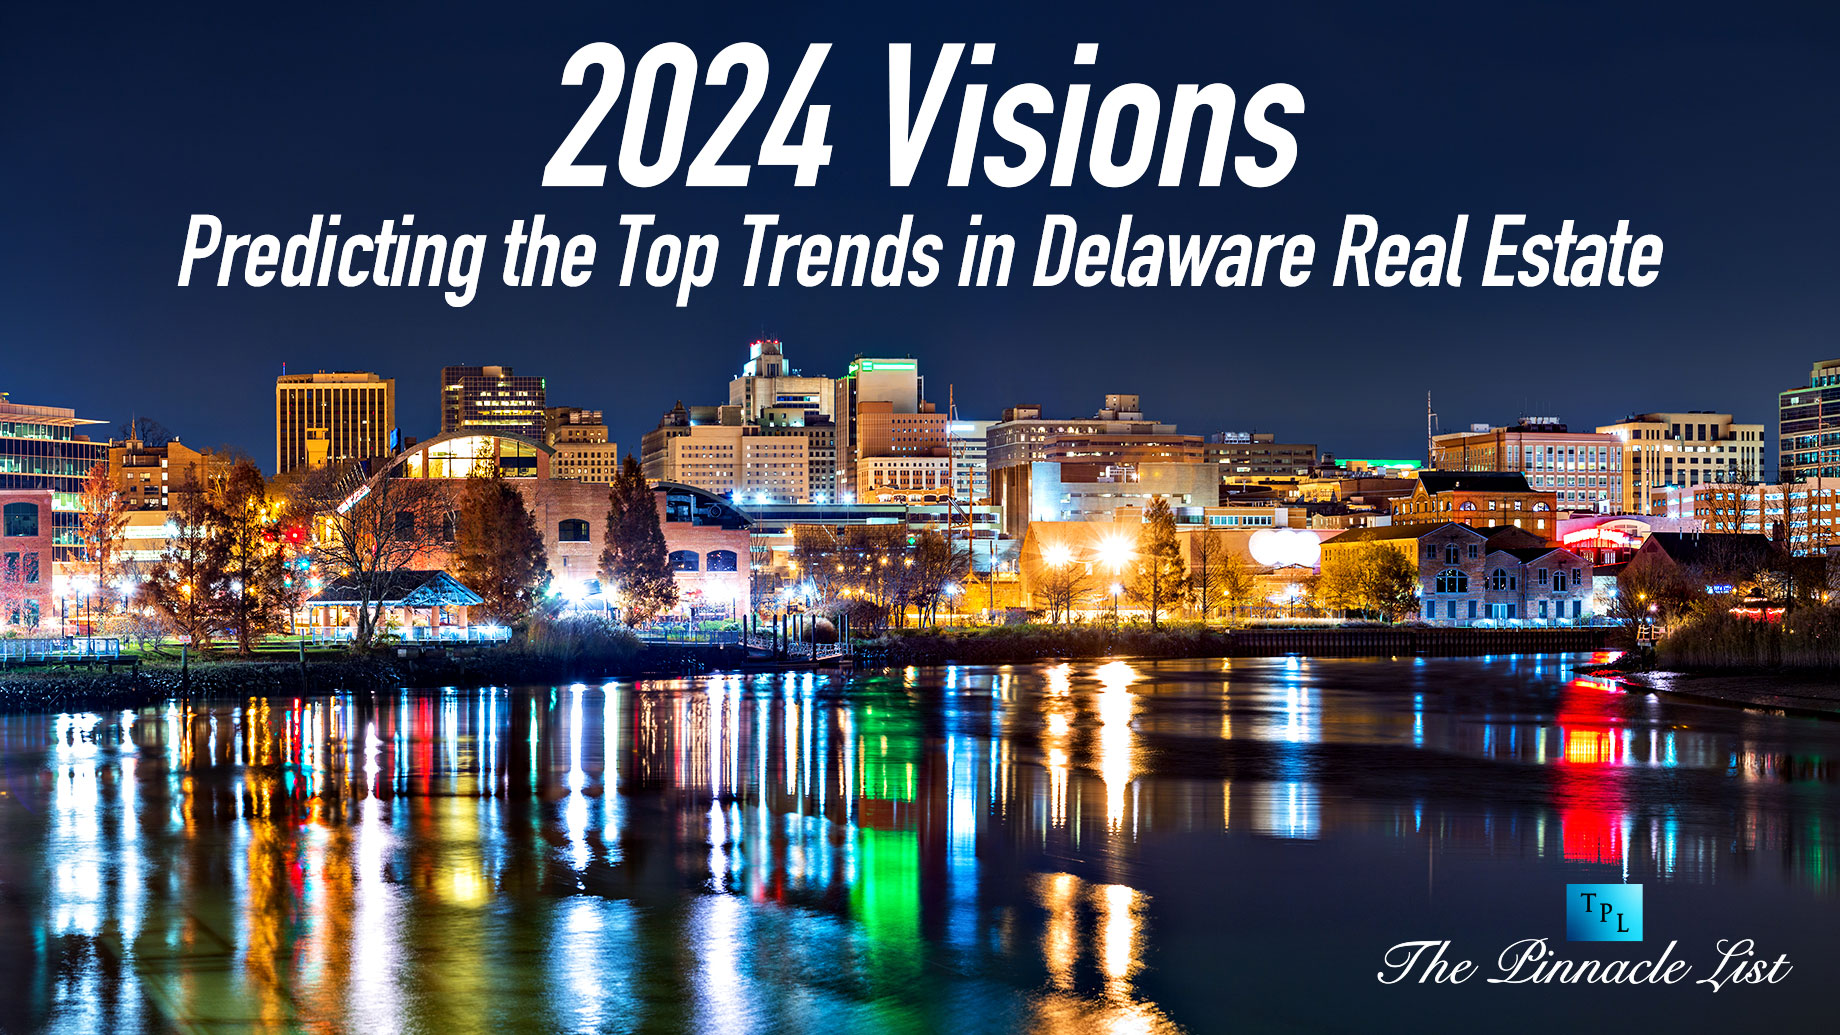 2024 Visions: Predicting the Top Trends in Delaware Real Estate